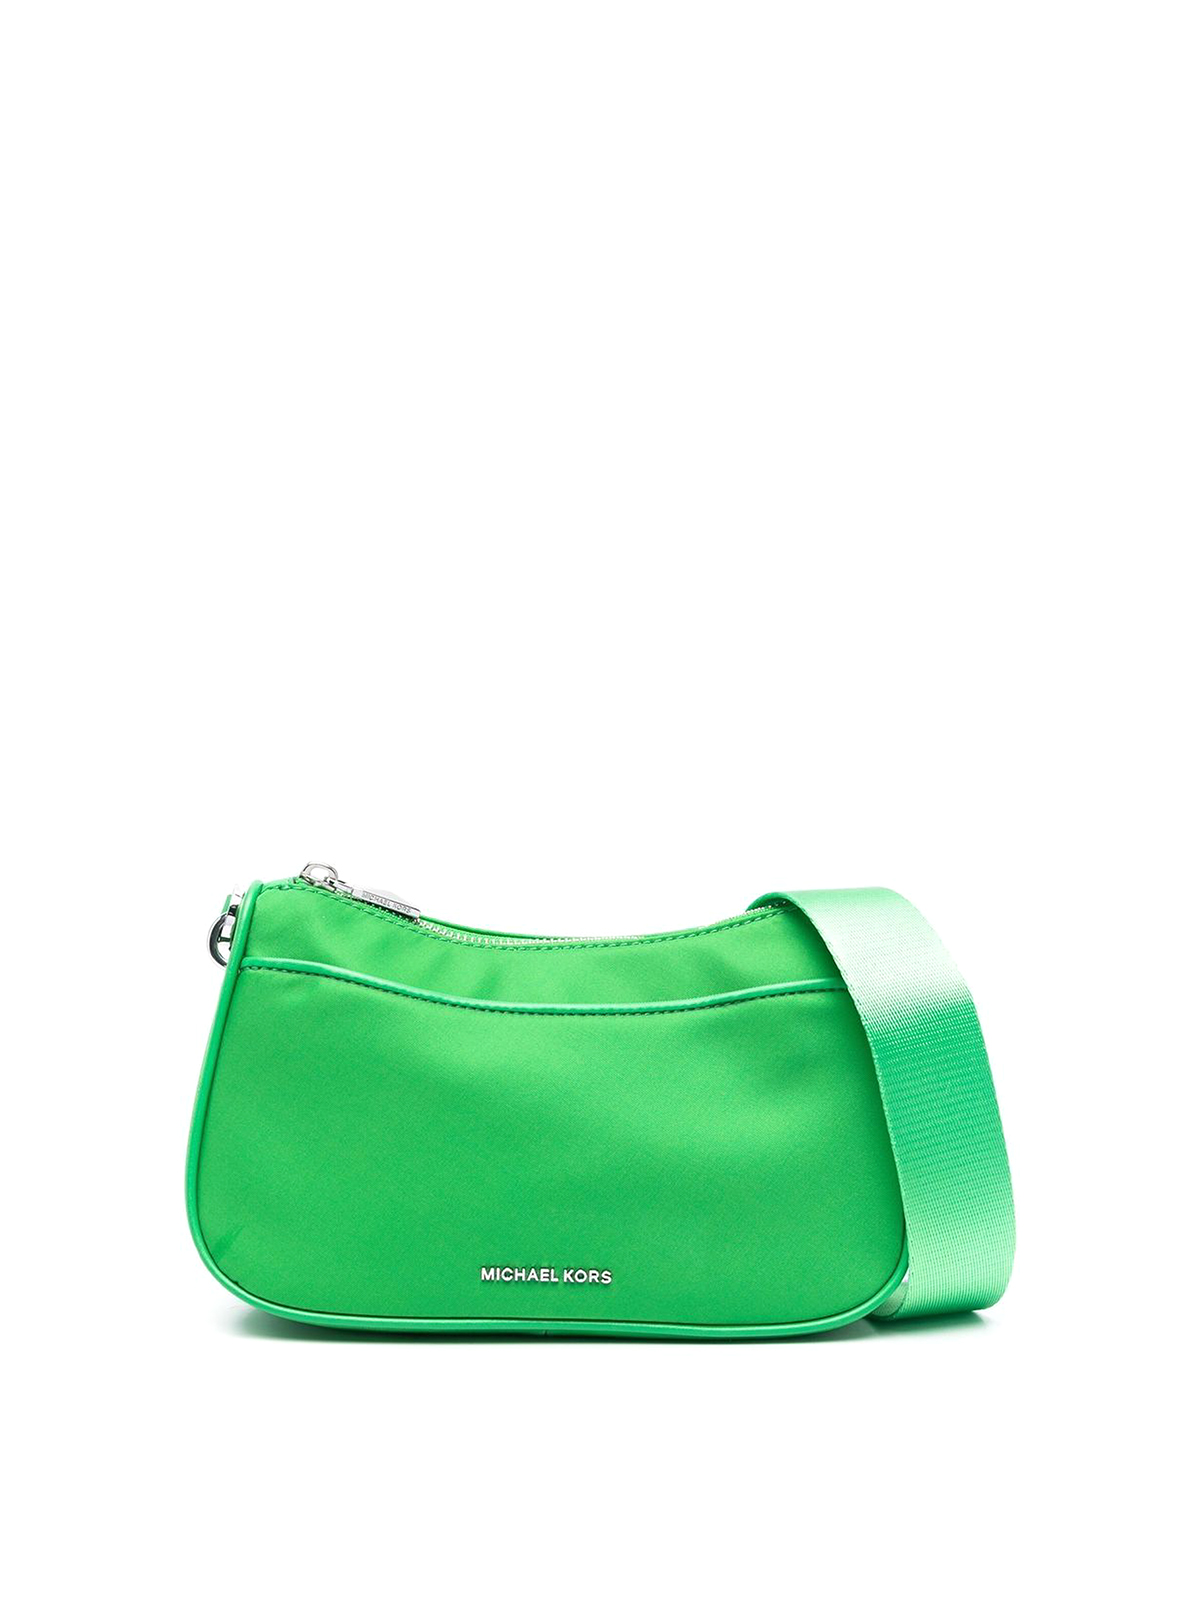 Michael Michael Kors Jet Set Bag With Detachable Coin Purse In Green